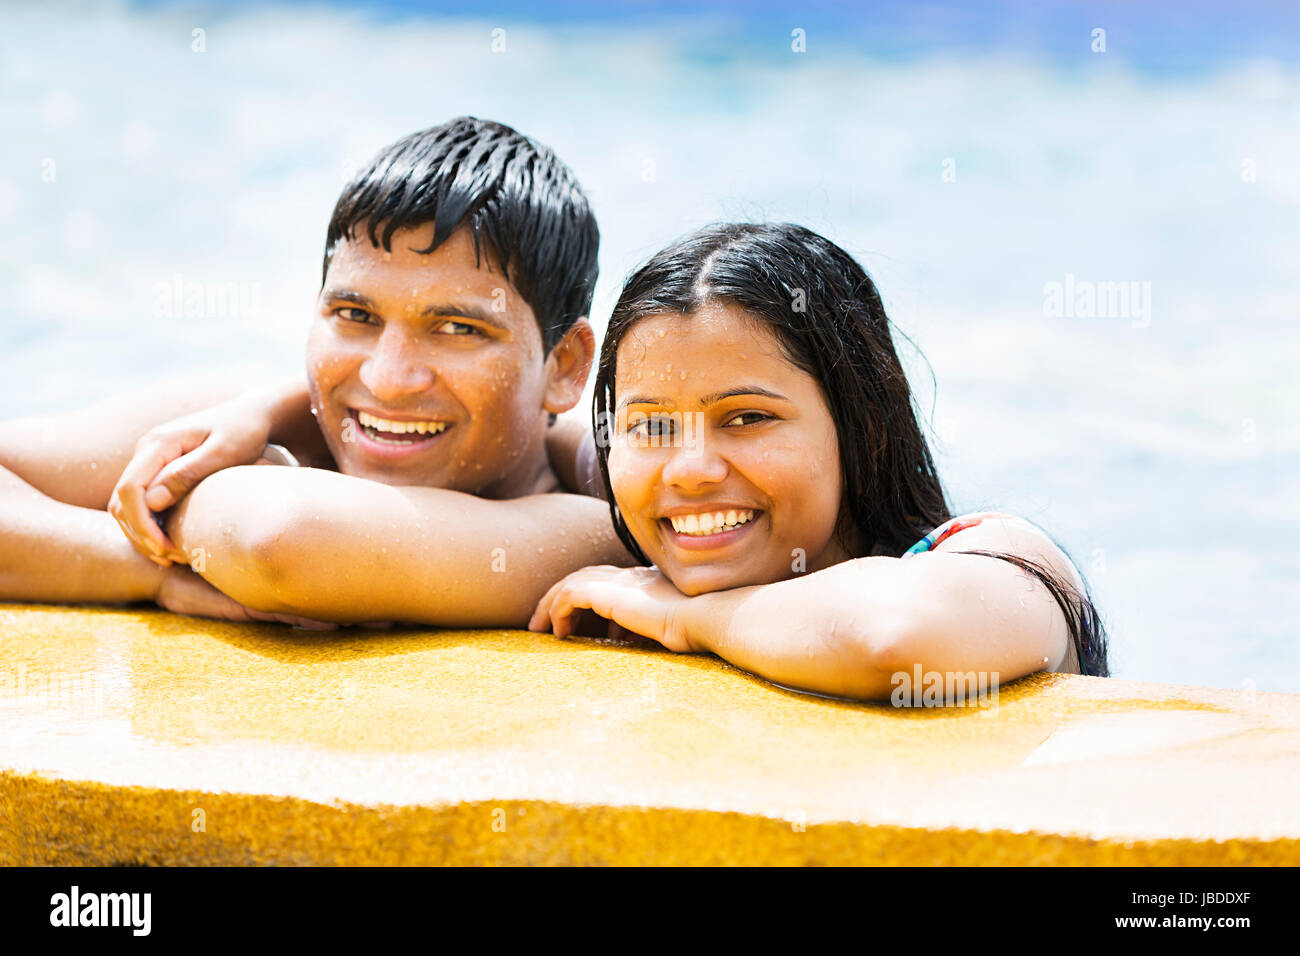 Happy 2 Indian Young Friend Swimming Pool Ledge Waterpark Bathing Stock Photo